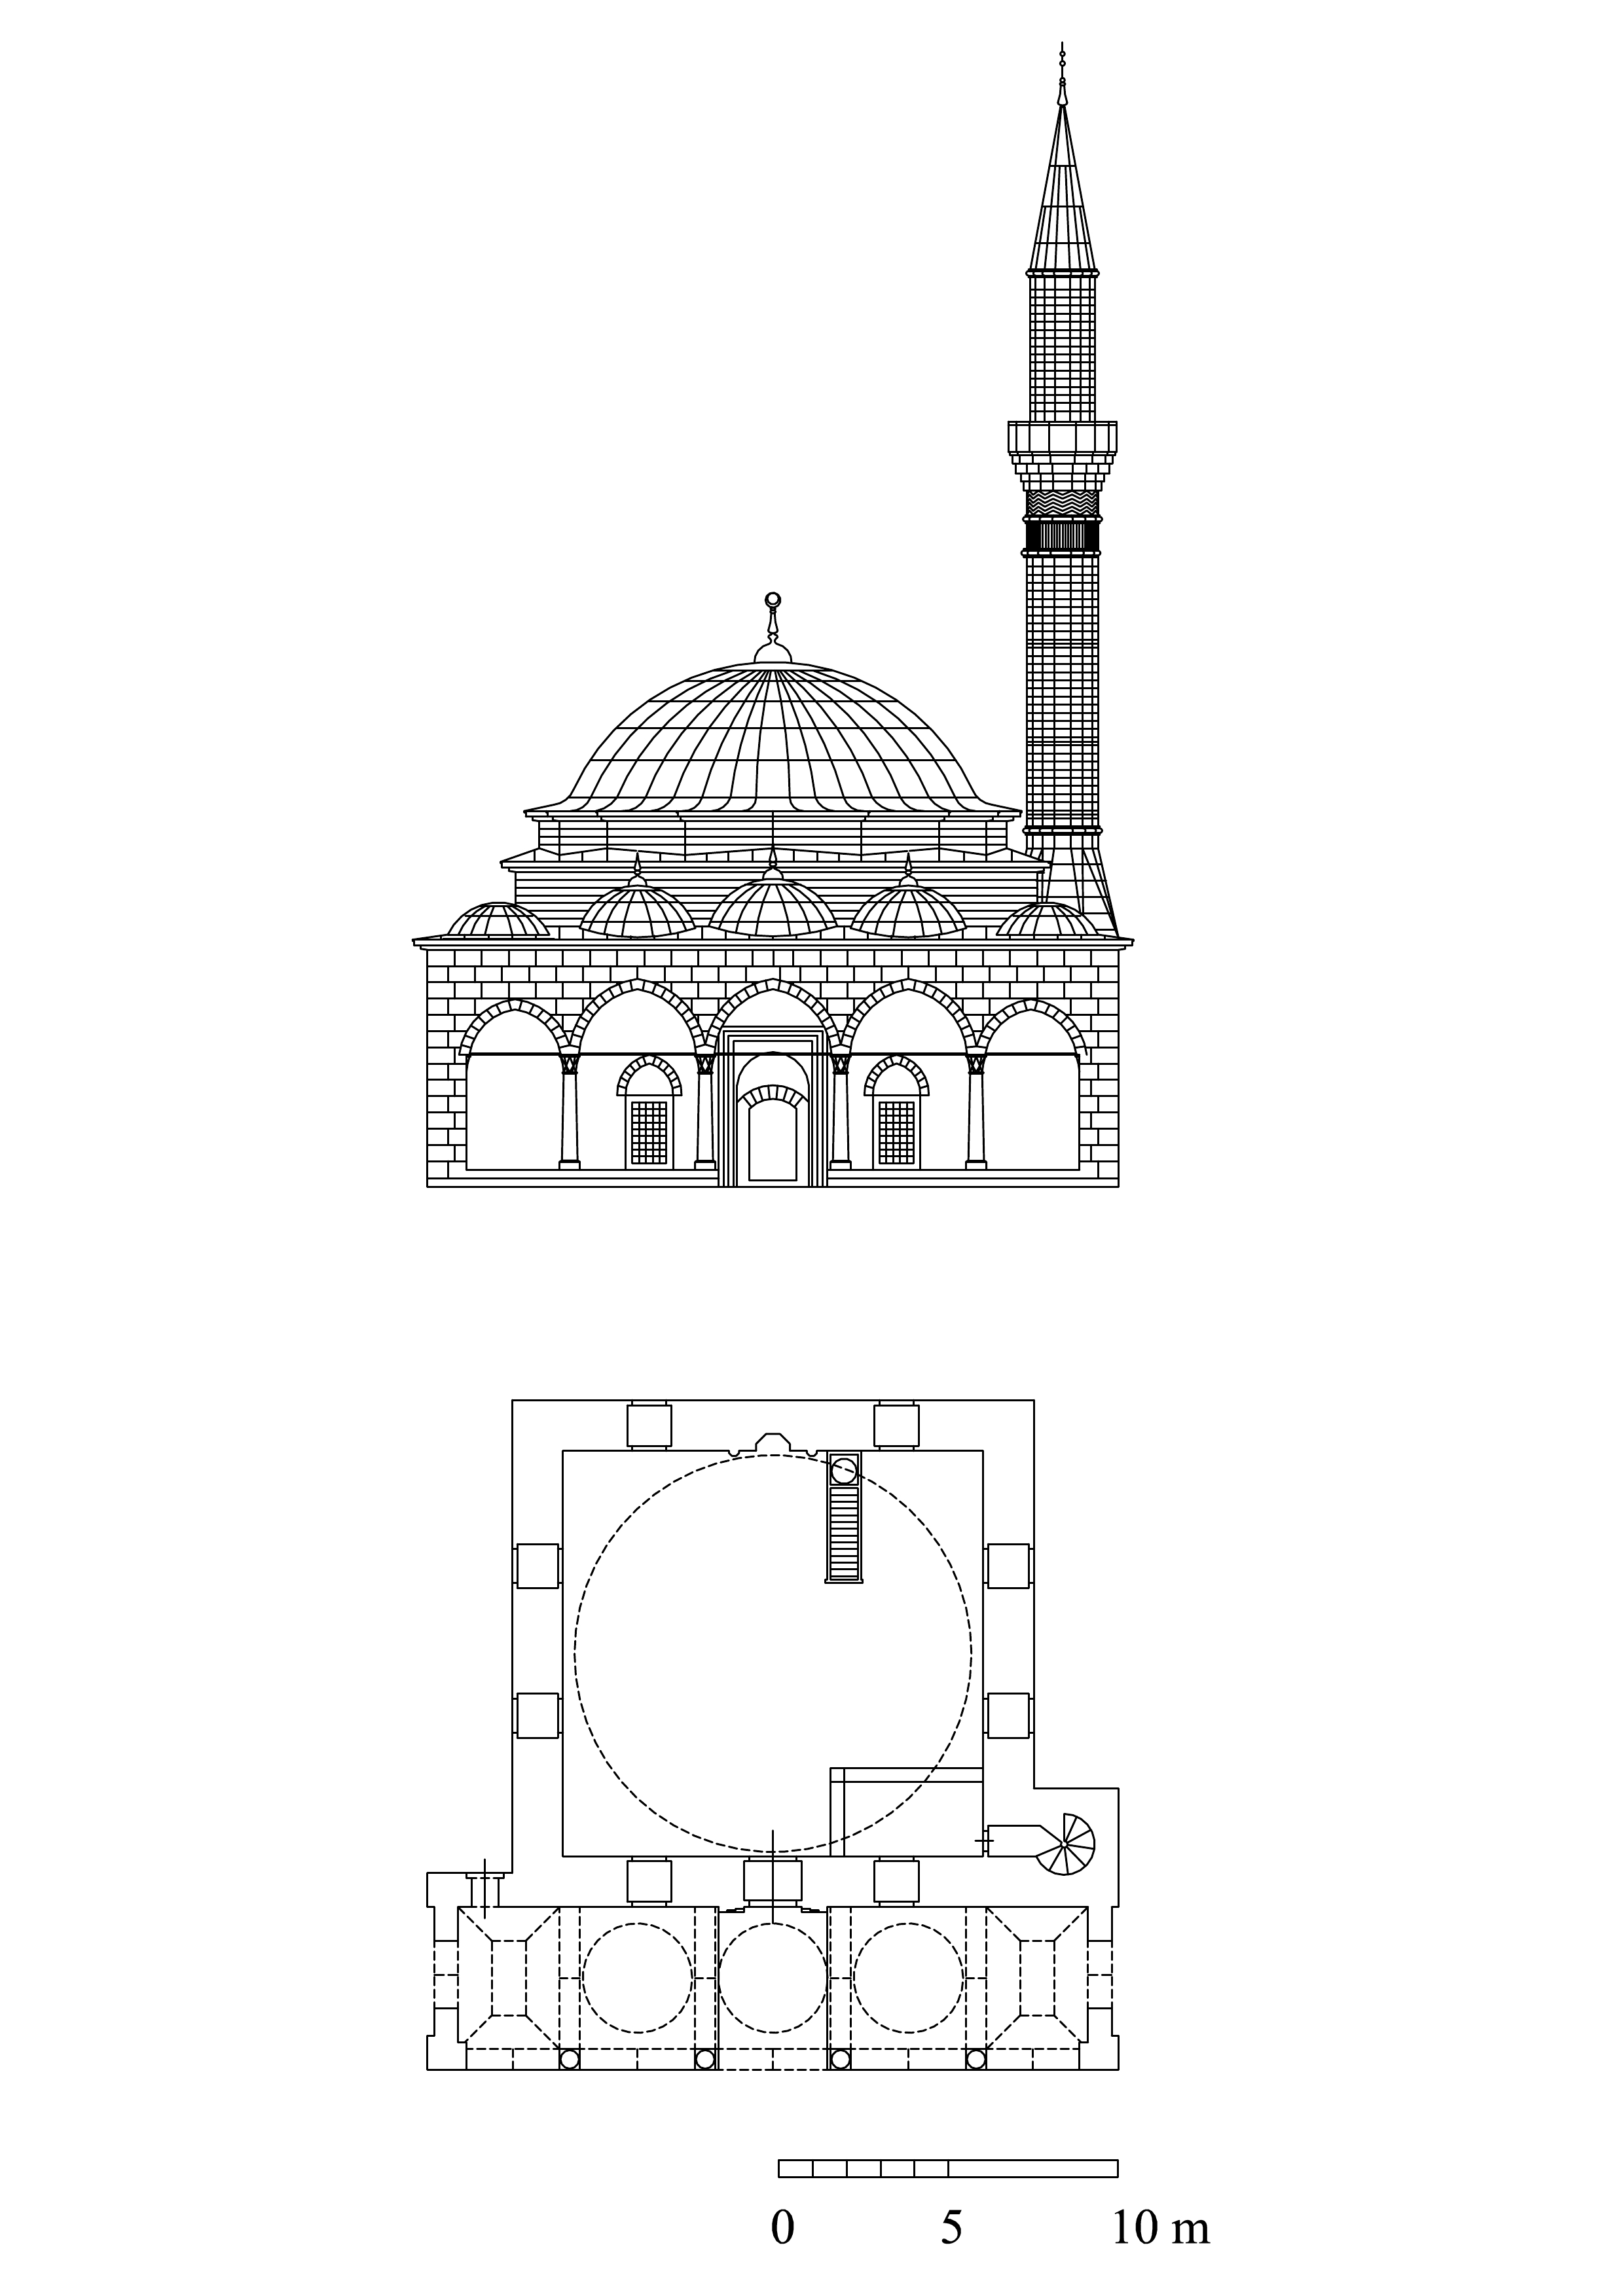 Lala Hüseyin Paşa Camii - Floor plan and elevation. DWG file in AutoCAD 2000 format. Click the download button to download a zipped file containing the .dwg file.